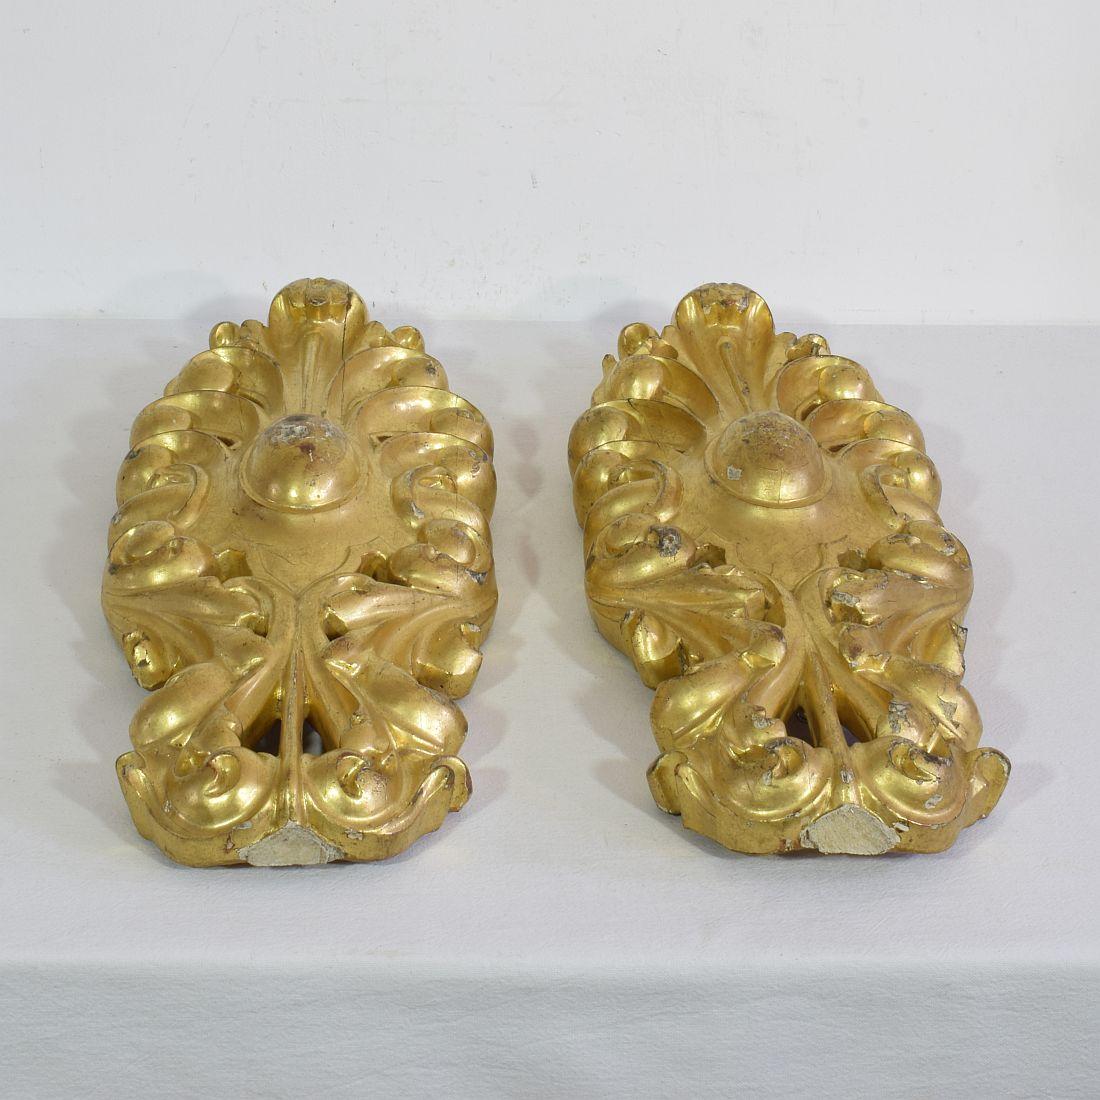 Pair Large 18th Century Italian Neoclassical Carved Giltwood Ornaments 12